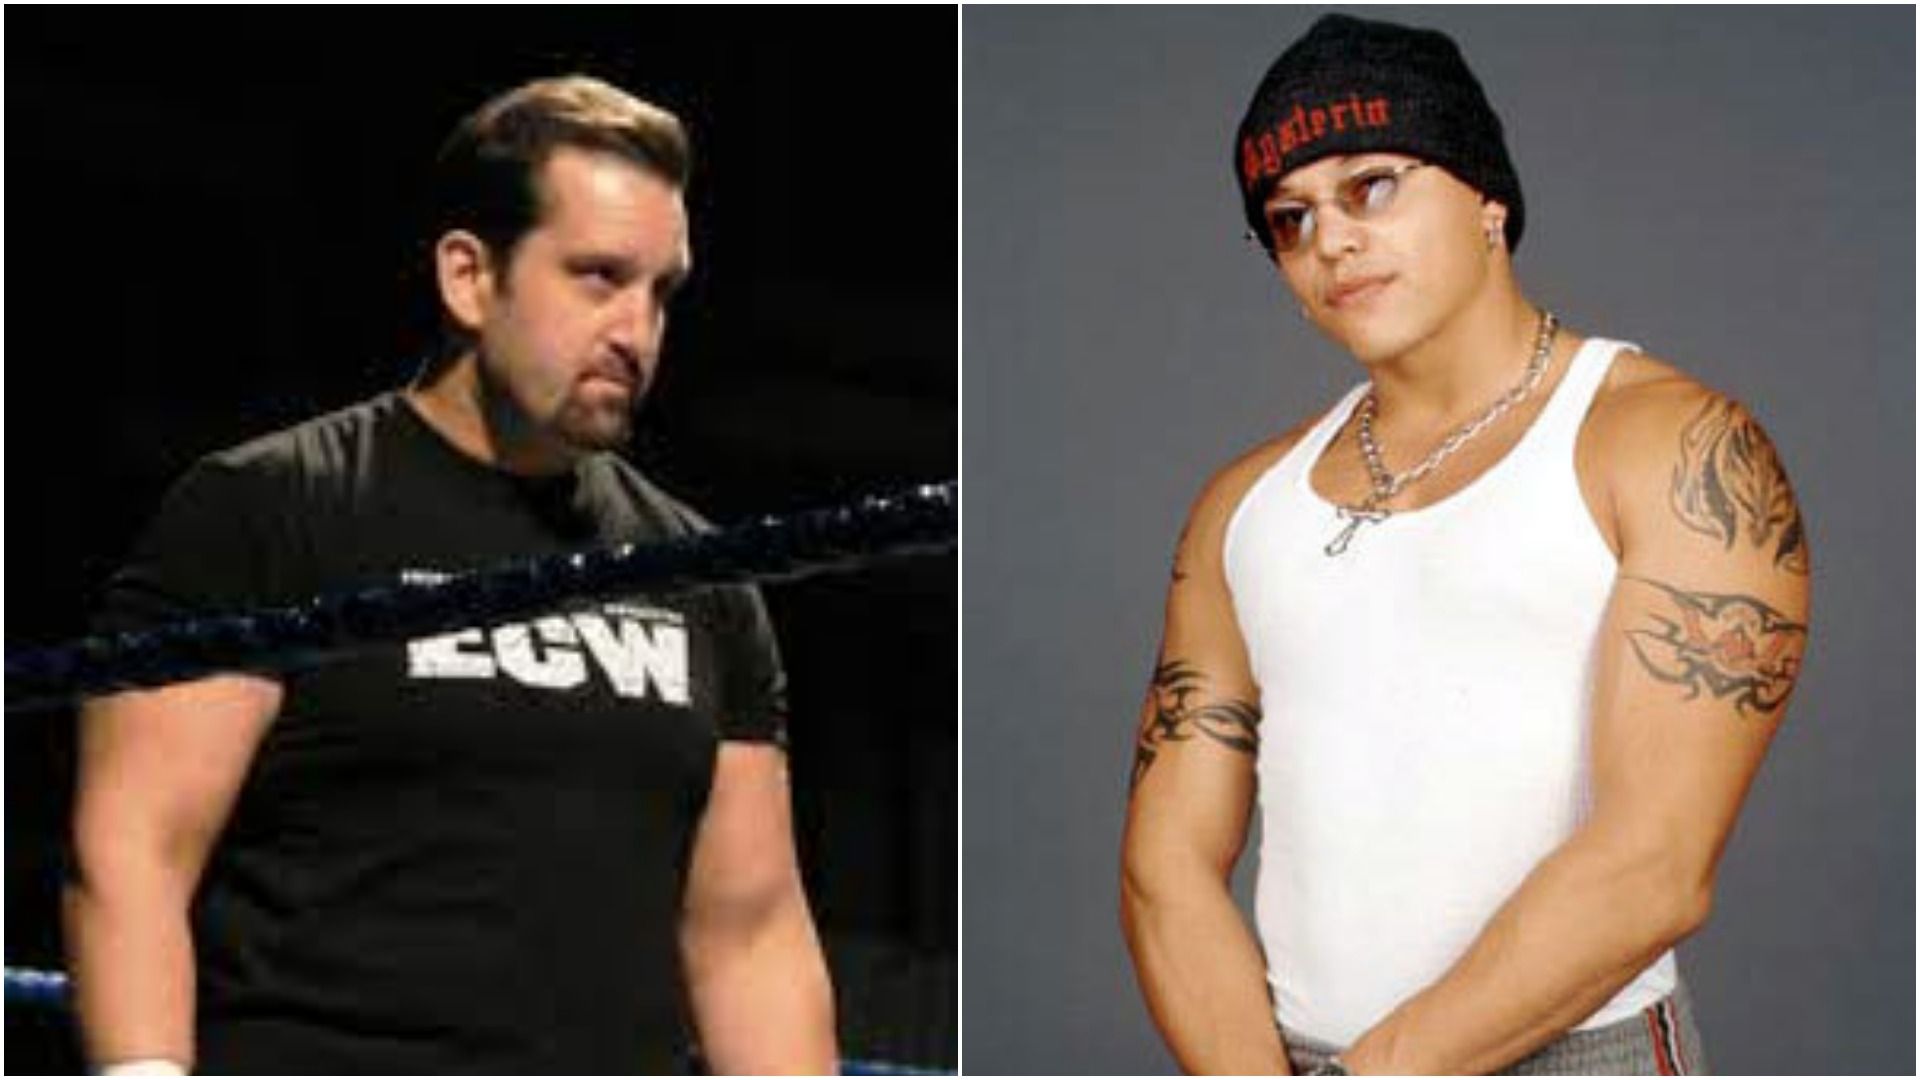 Collage featuring Tommy Dreamer (left) and Rey Mysterio (right)